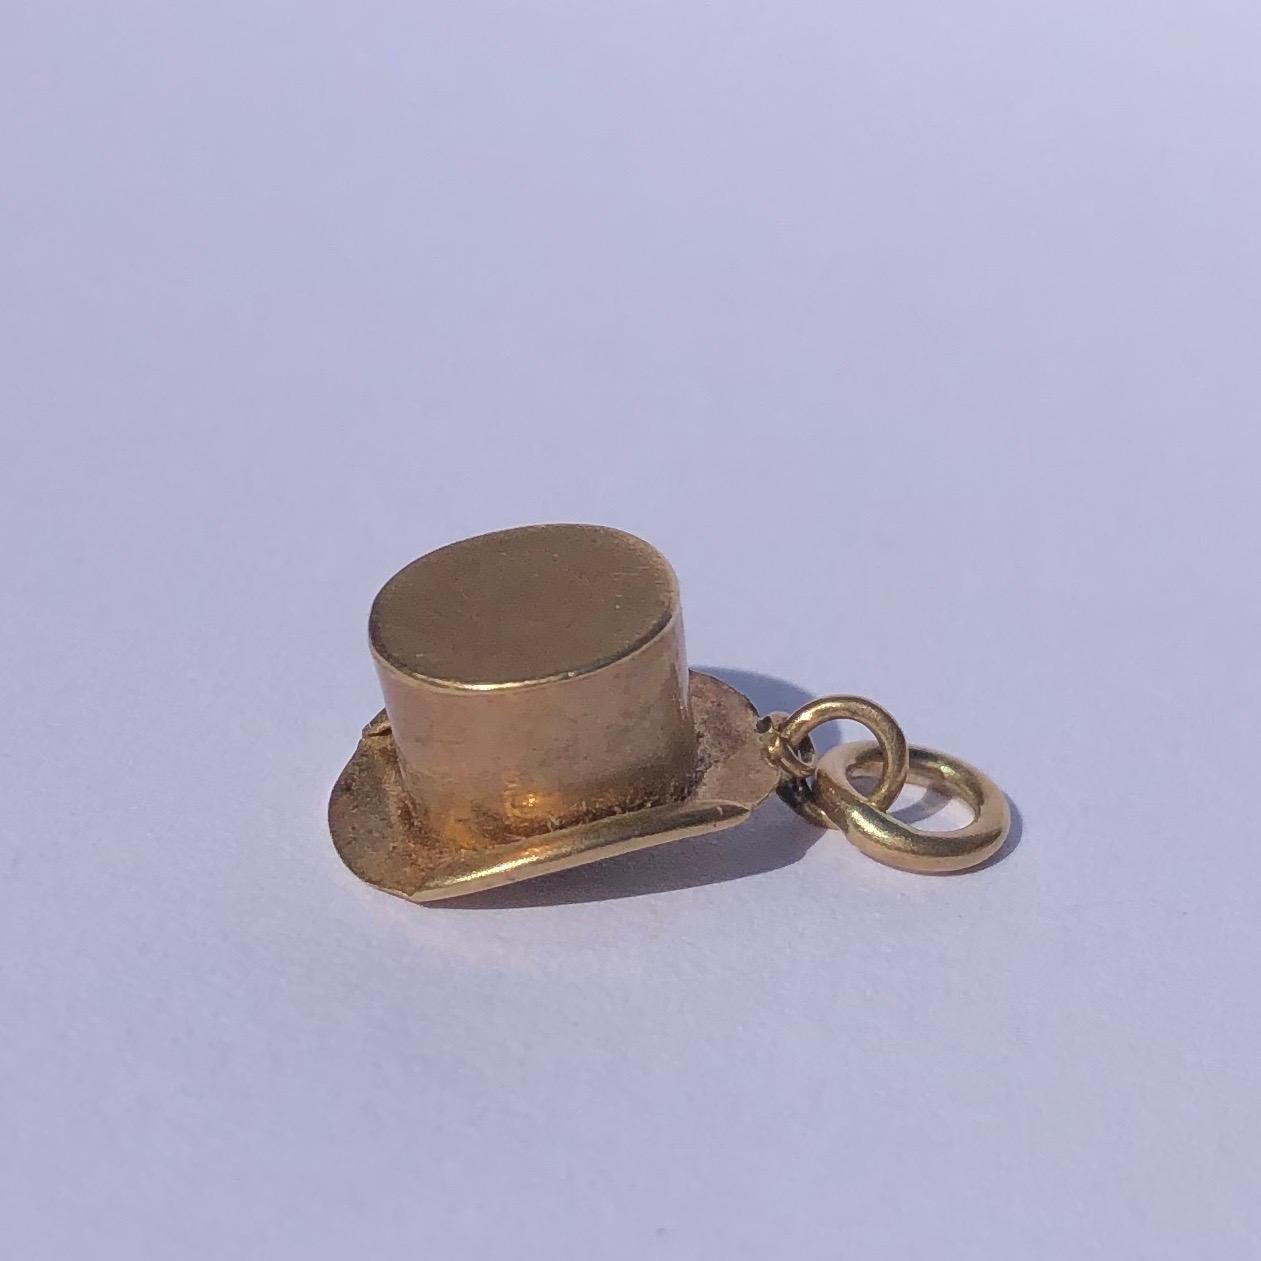 This is the sweetest little charm! It is a glossy gold top hat. The charm is modelled in 9ct gold. 

Hat Dimensions: 17x7.5mm 

Weight: 0.89g